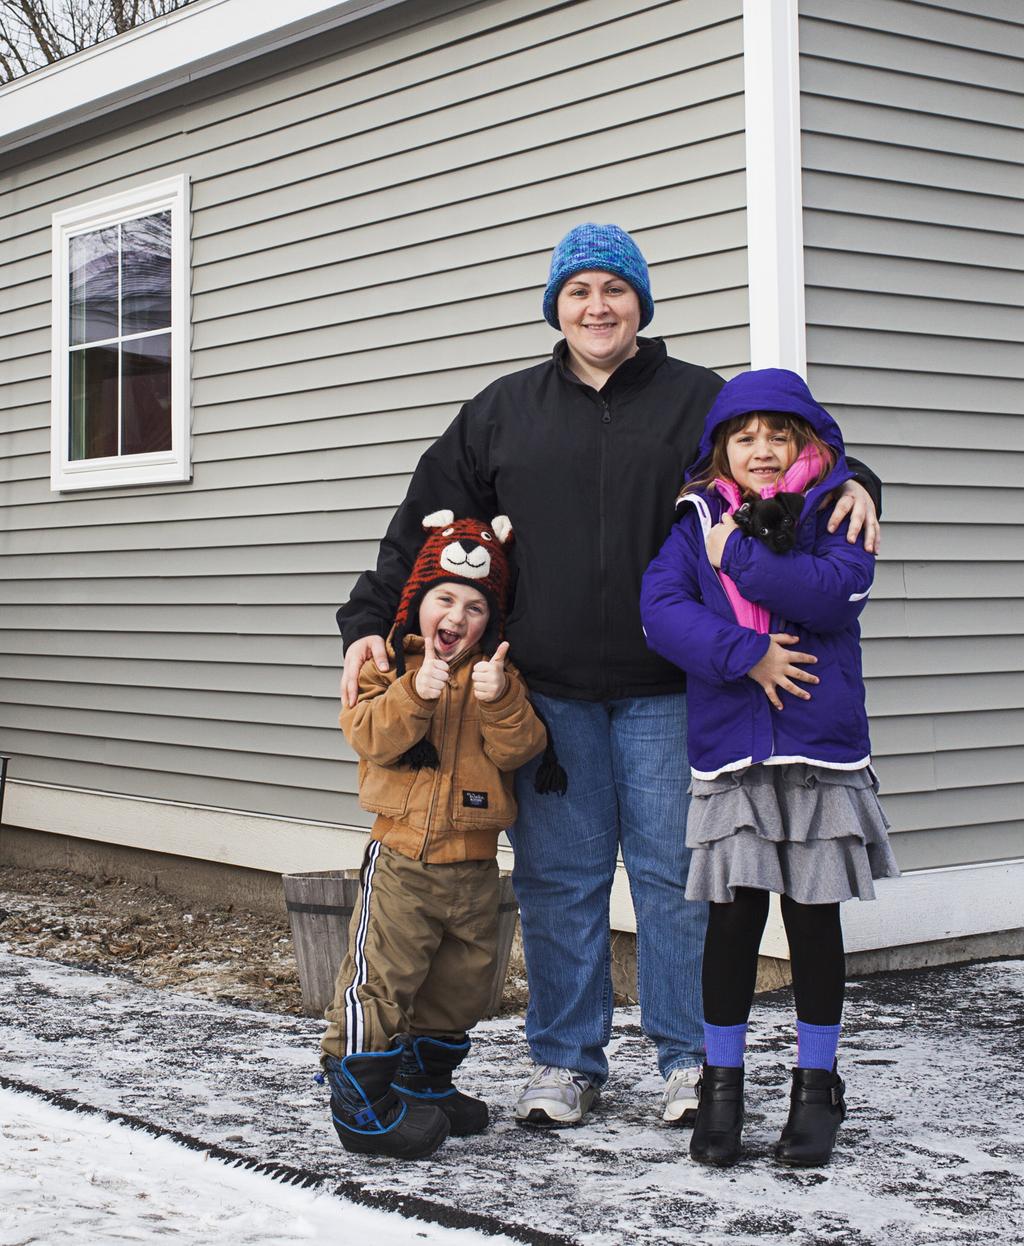 A durable, energy efficient home means lower monthly costs than a standard mobile home Simone Colby lives in a high-performance modular home in Vergennes.